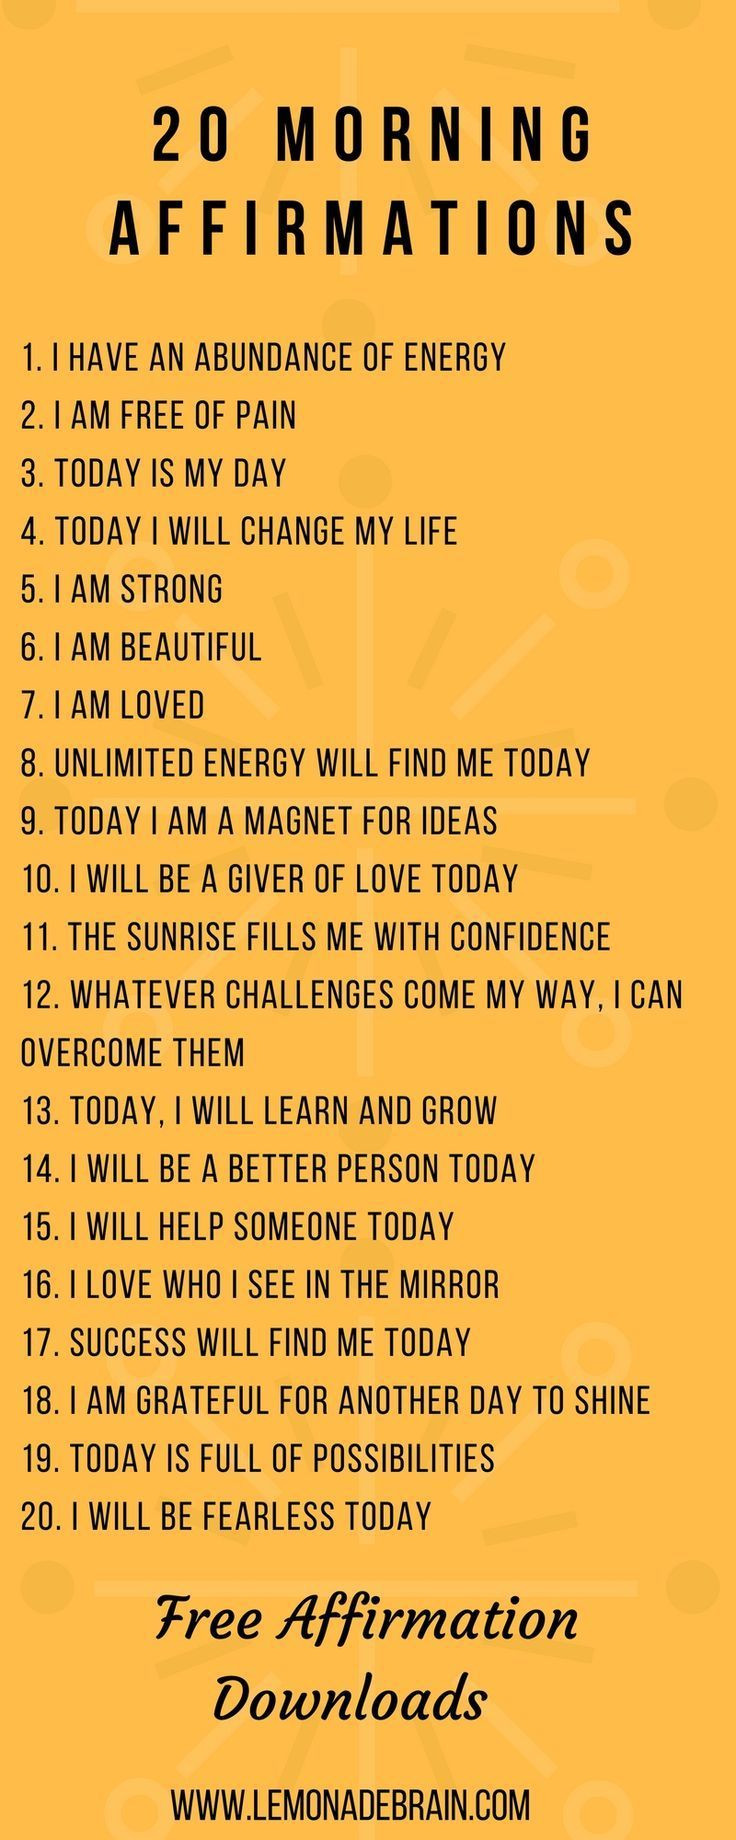 Positive Affirmations Quotes
 Positive Affirmations Plus Free Downloadable files